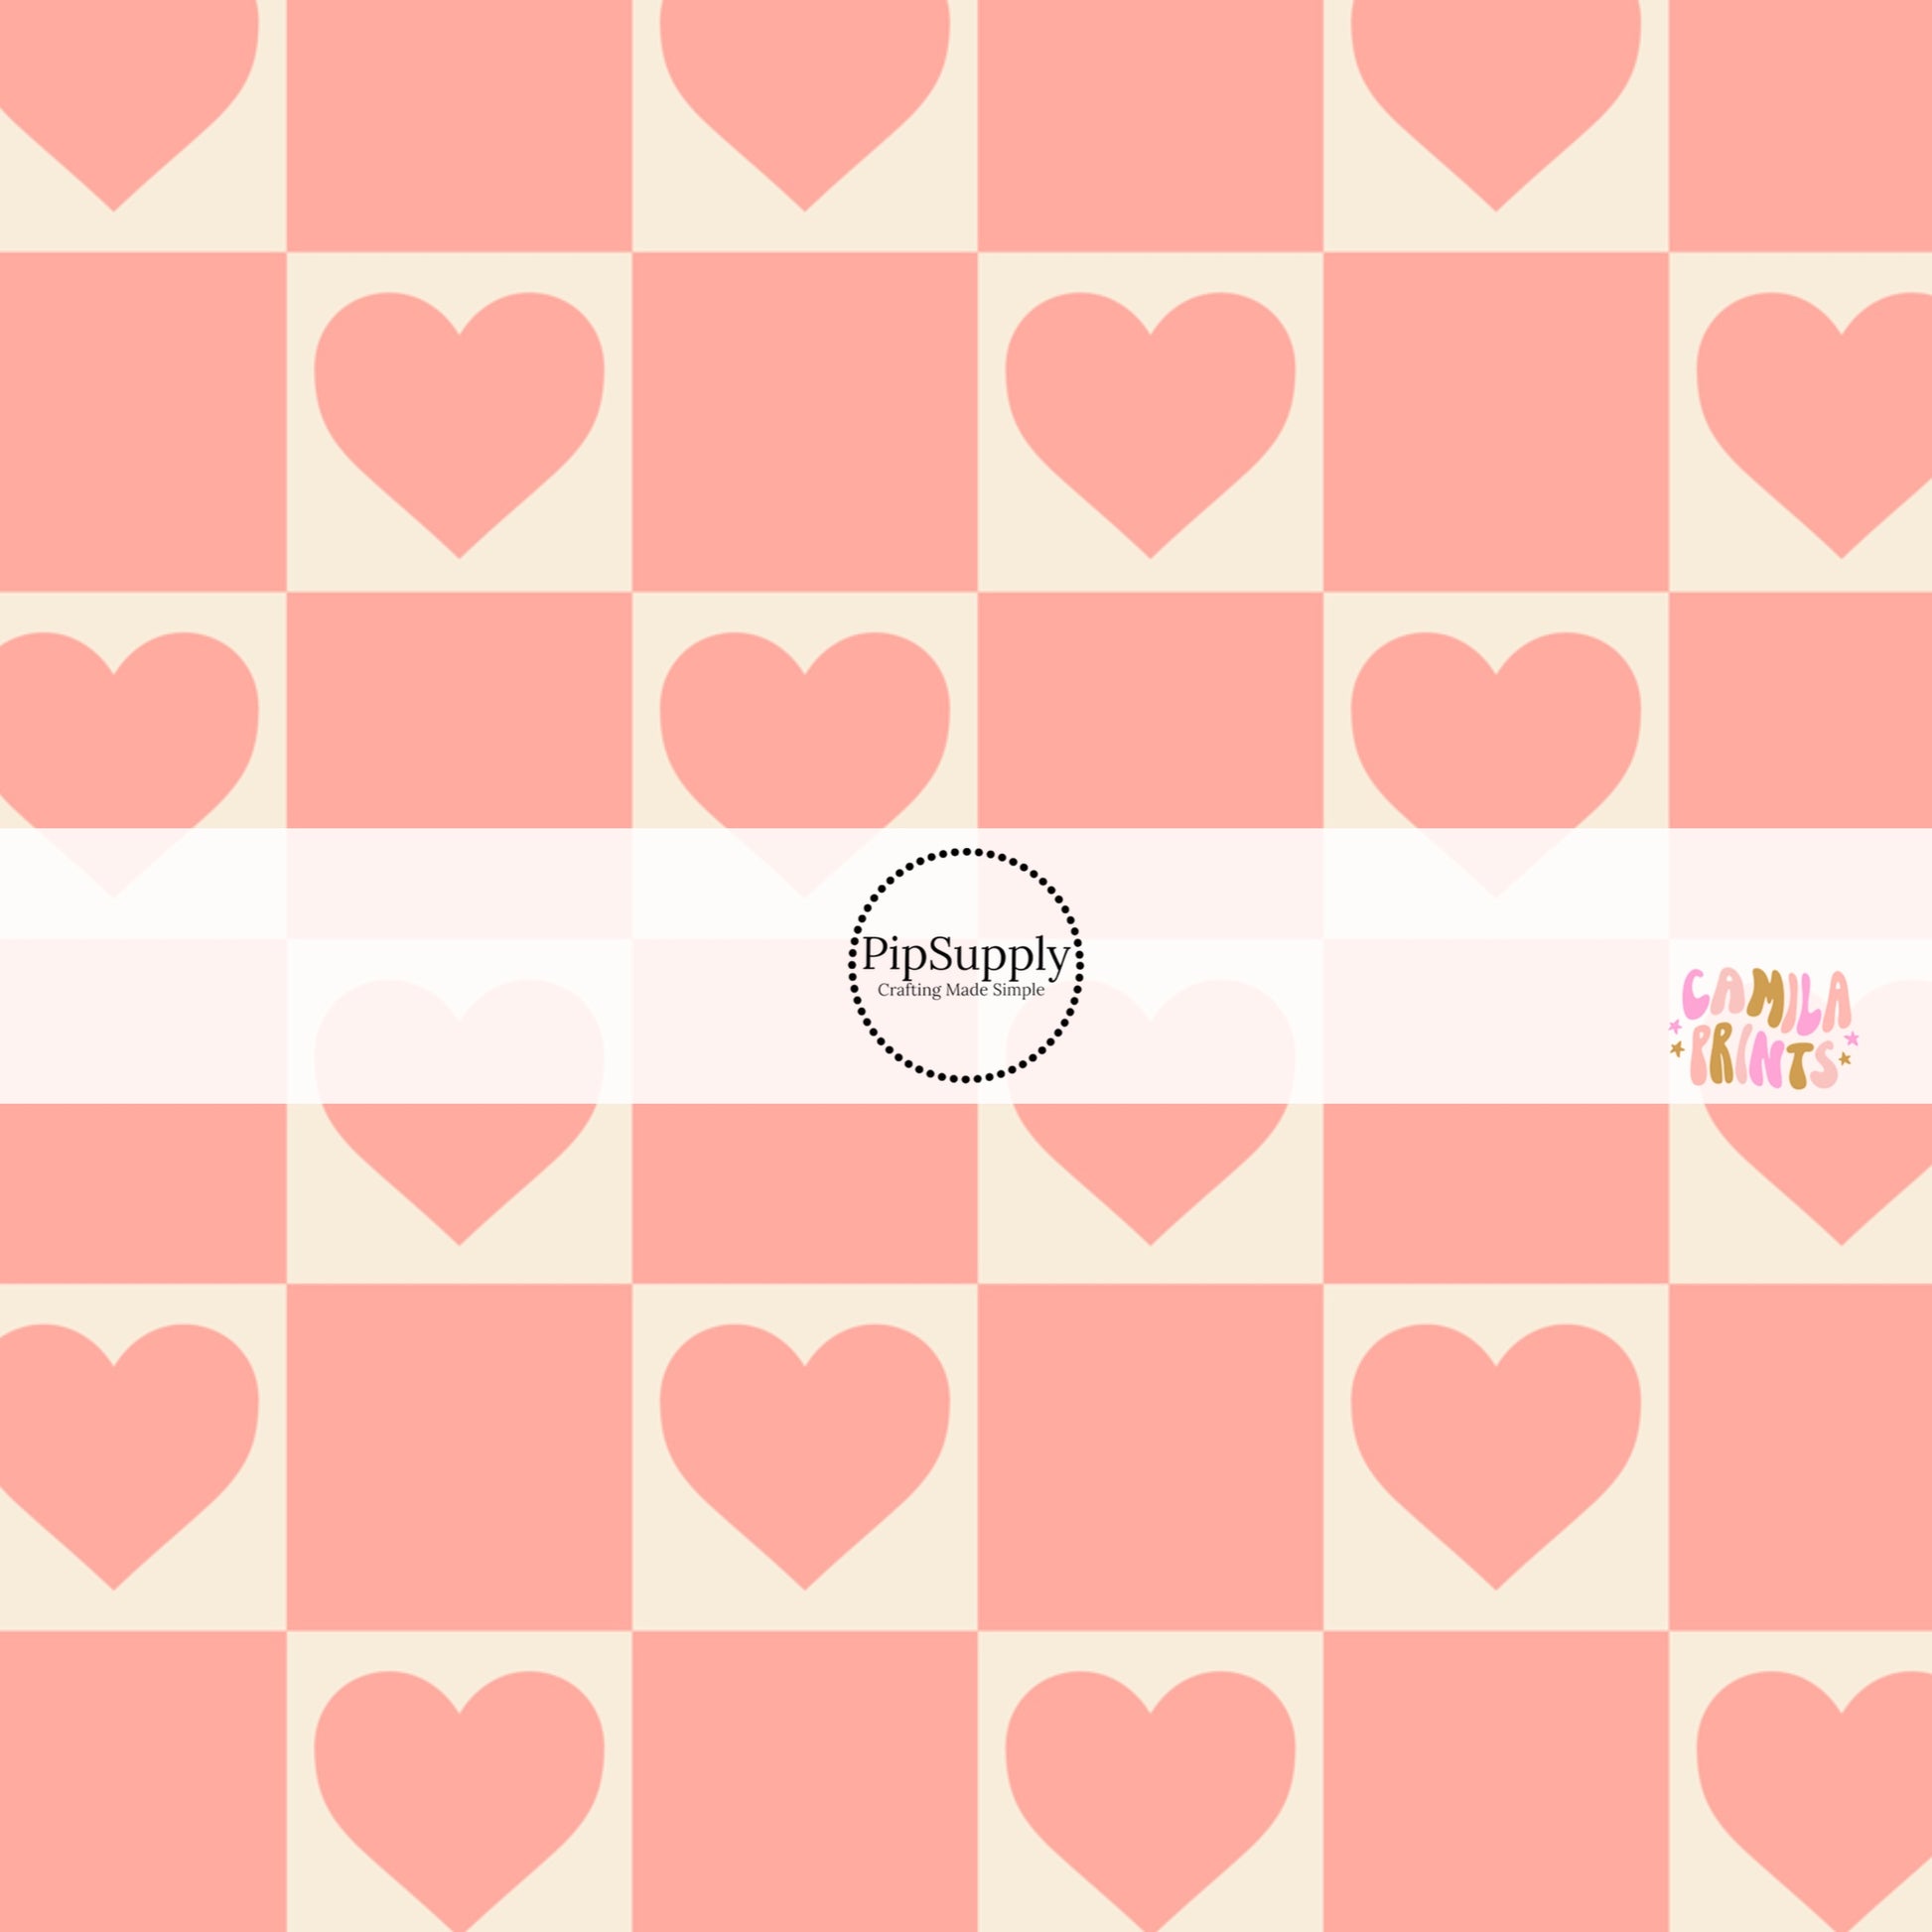 Pink and Cream heart checkered fabric print